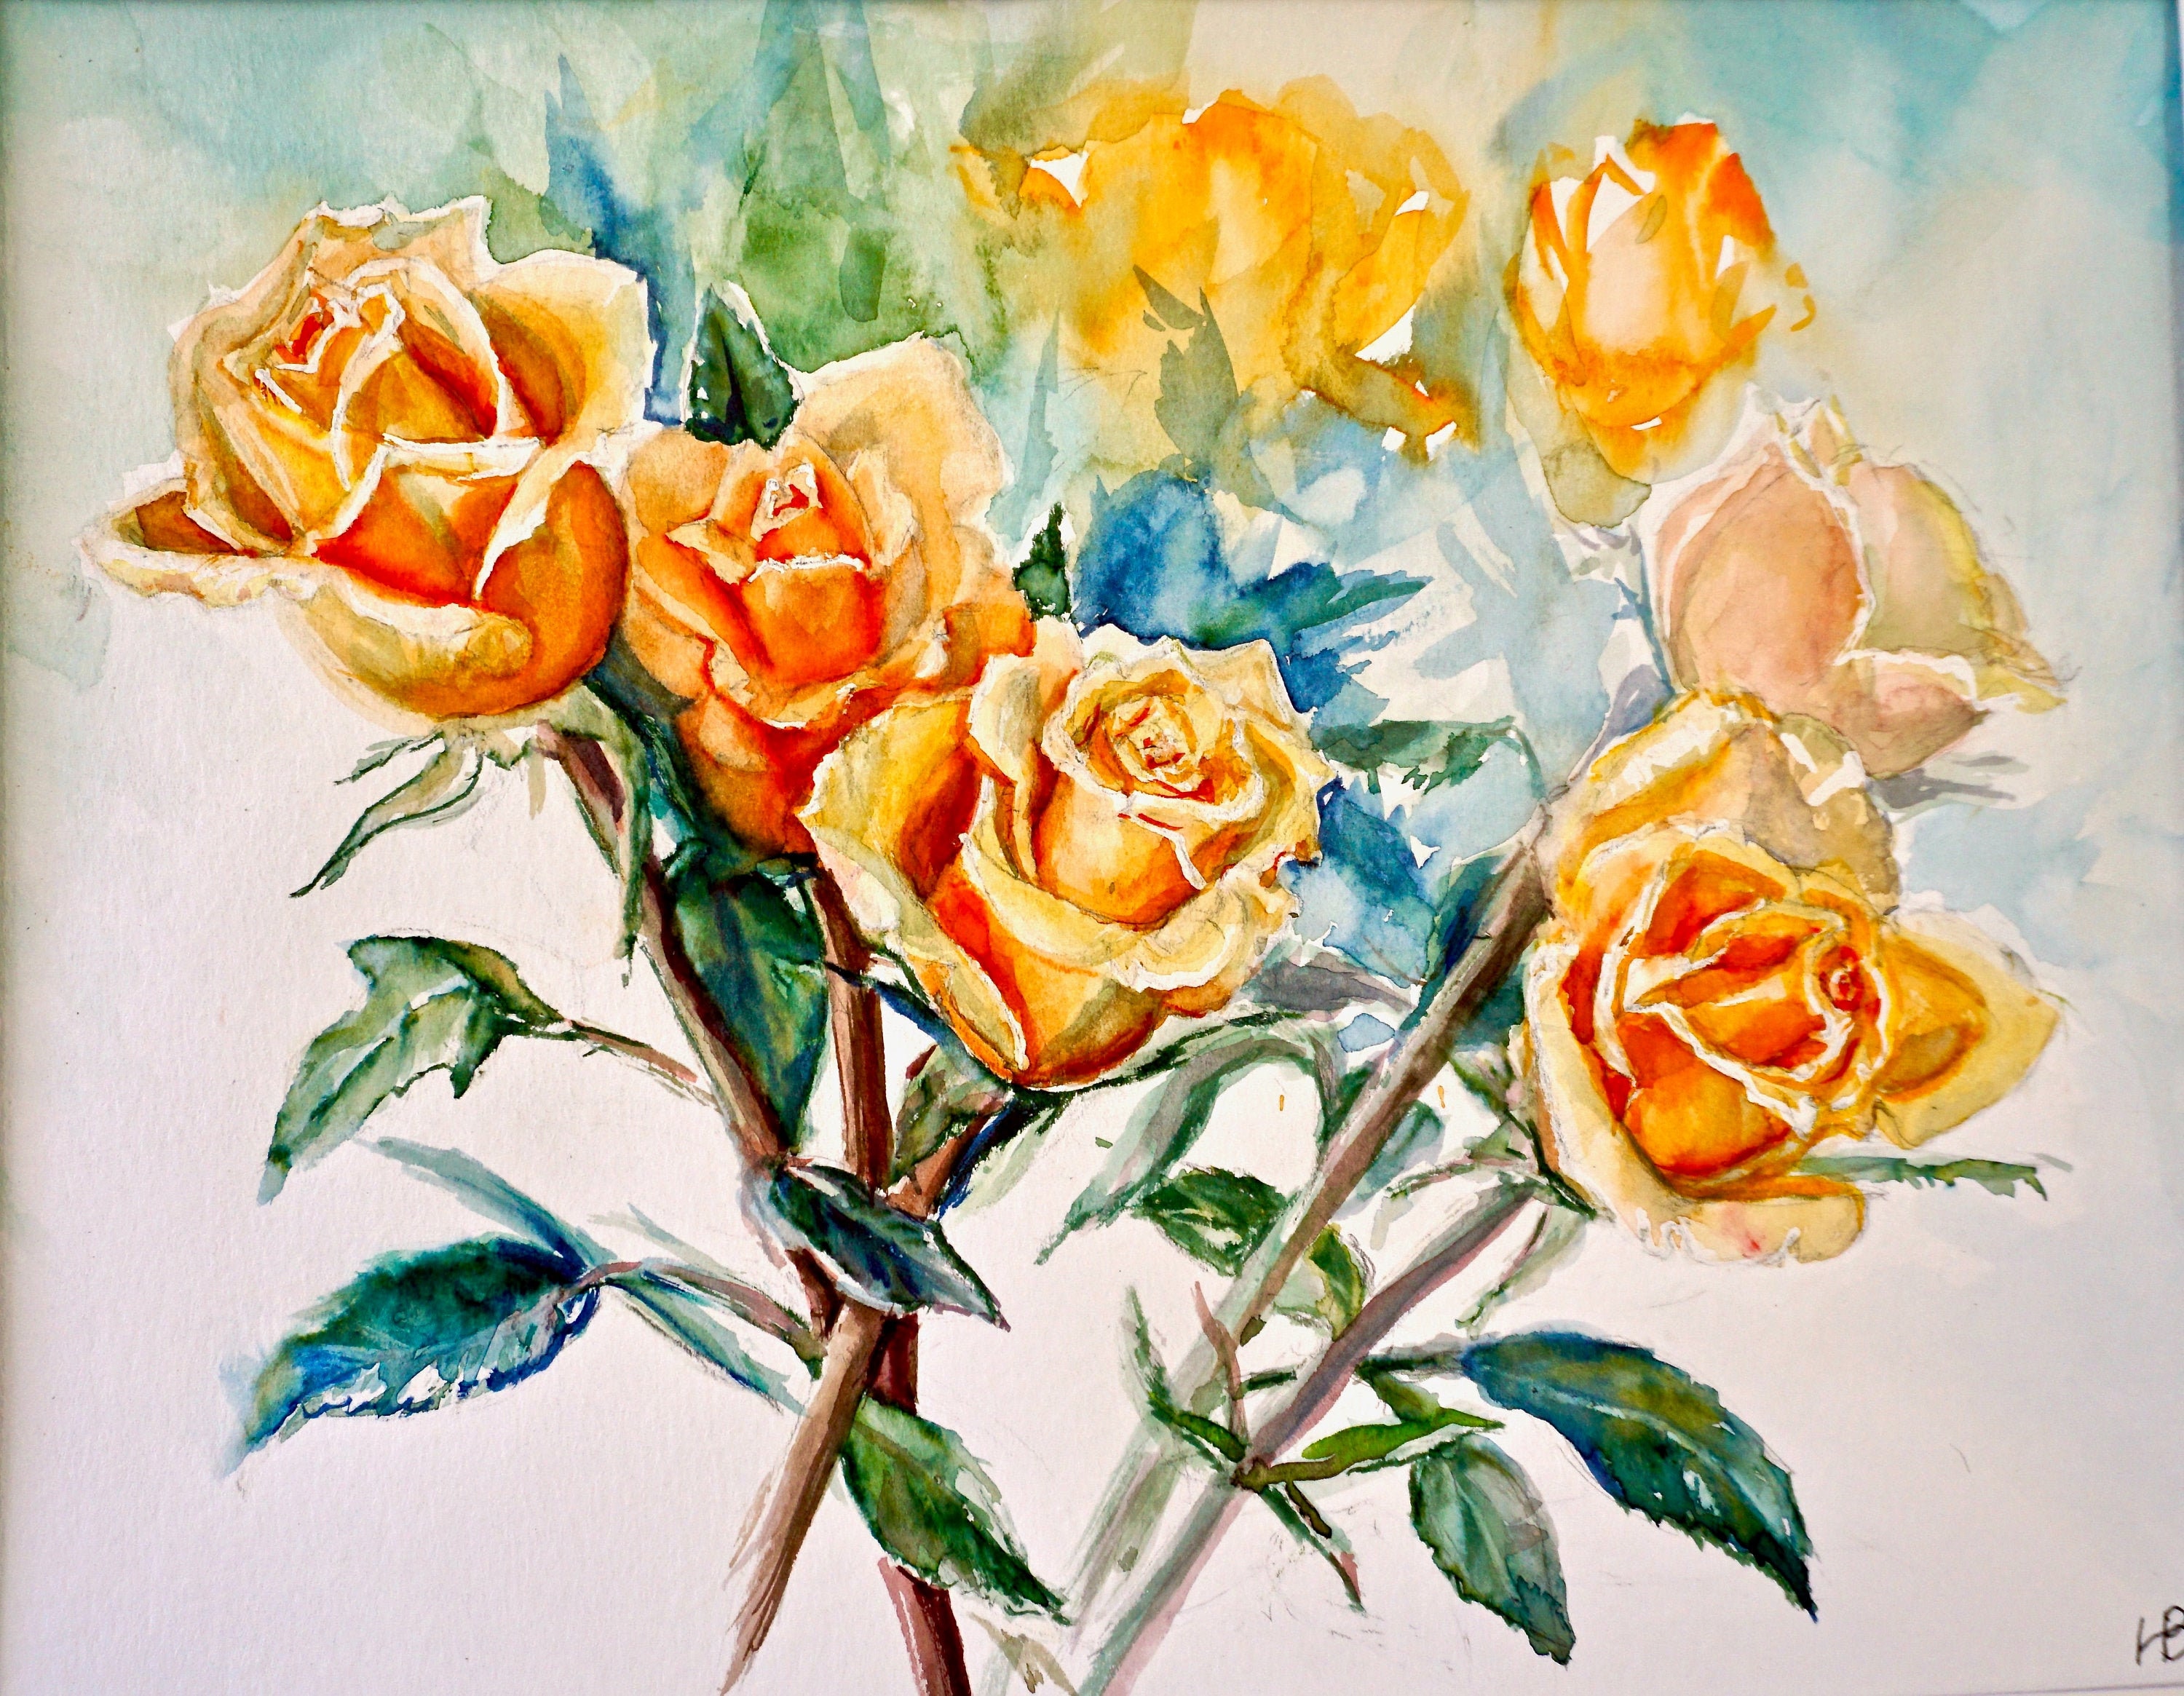 Yellow Roses Original Flower Watercolor Painting, Signed Floral Watercolor,  Original Wall Decor, Impressionist Art, Bright Flower Painting. 